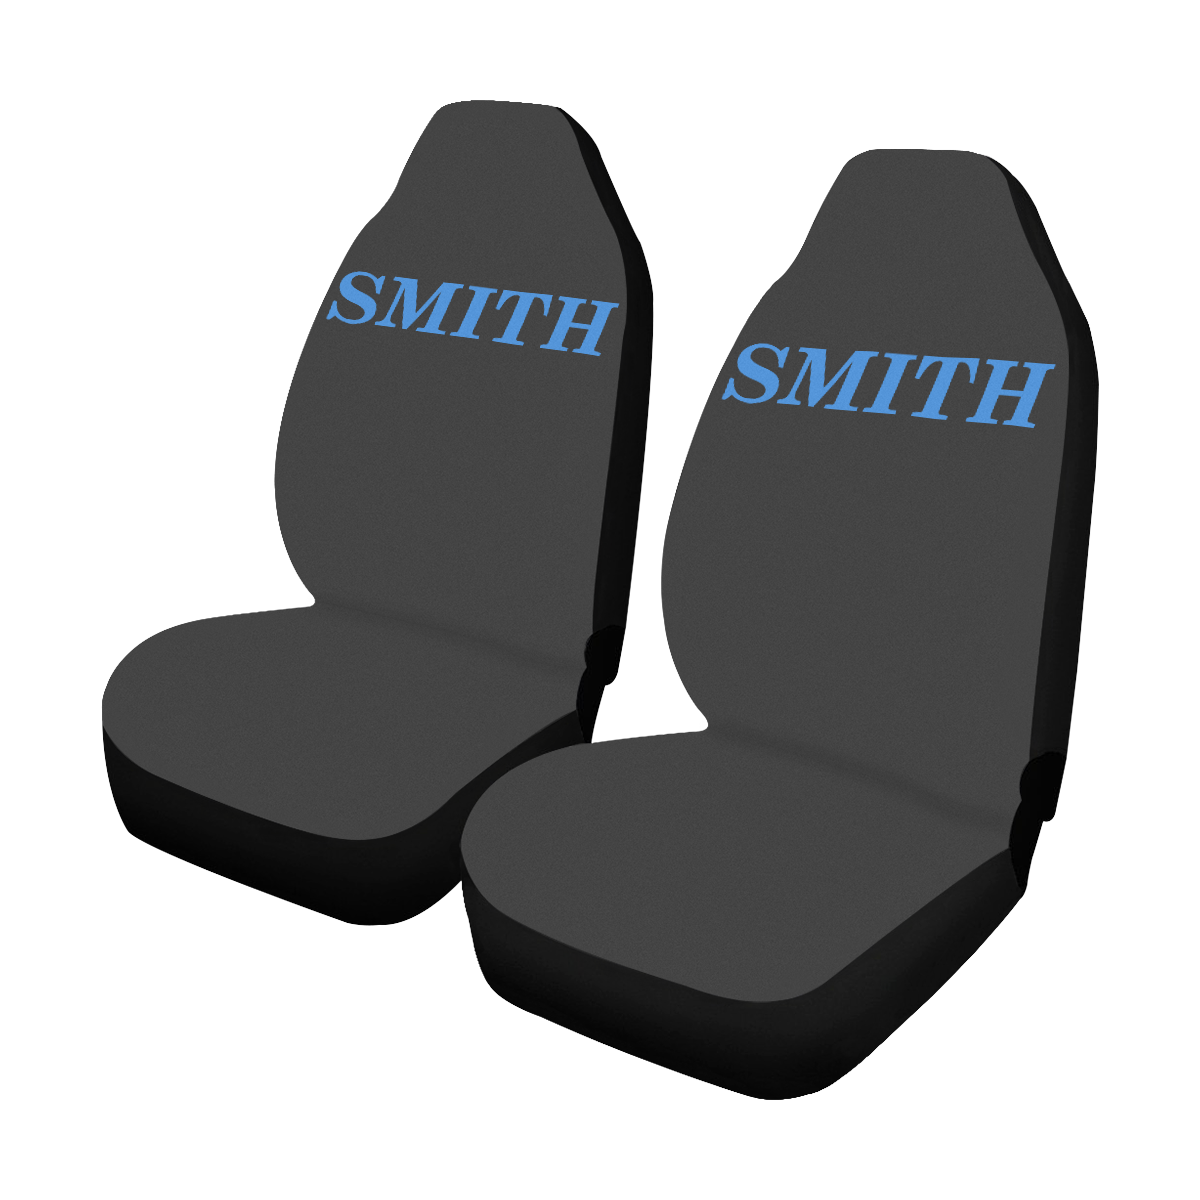 Smith Personalized Car Seat Covers (Set of 2)